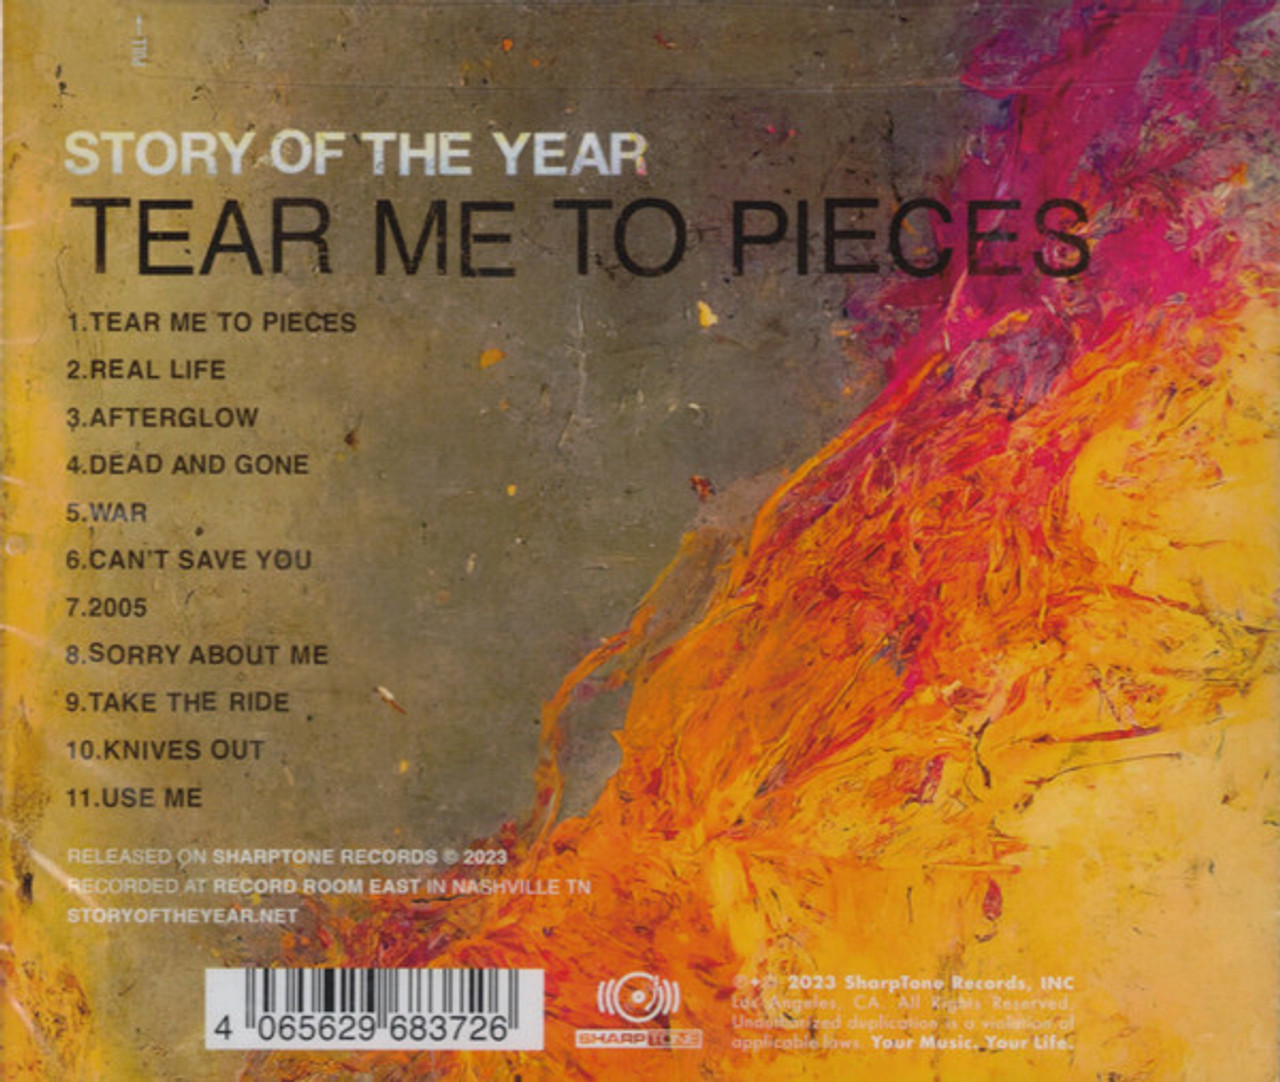 Story of the Year - Tear Me to Pieces: lyrics and songs